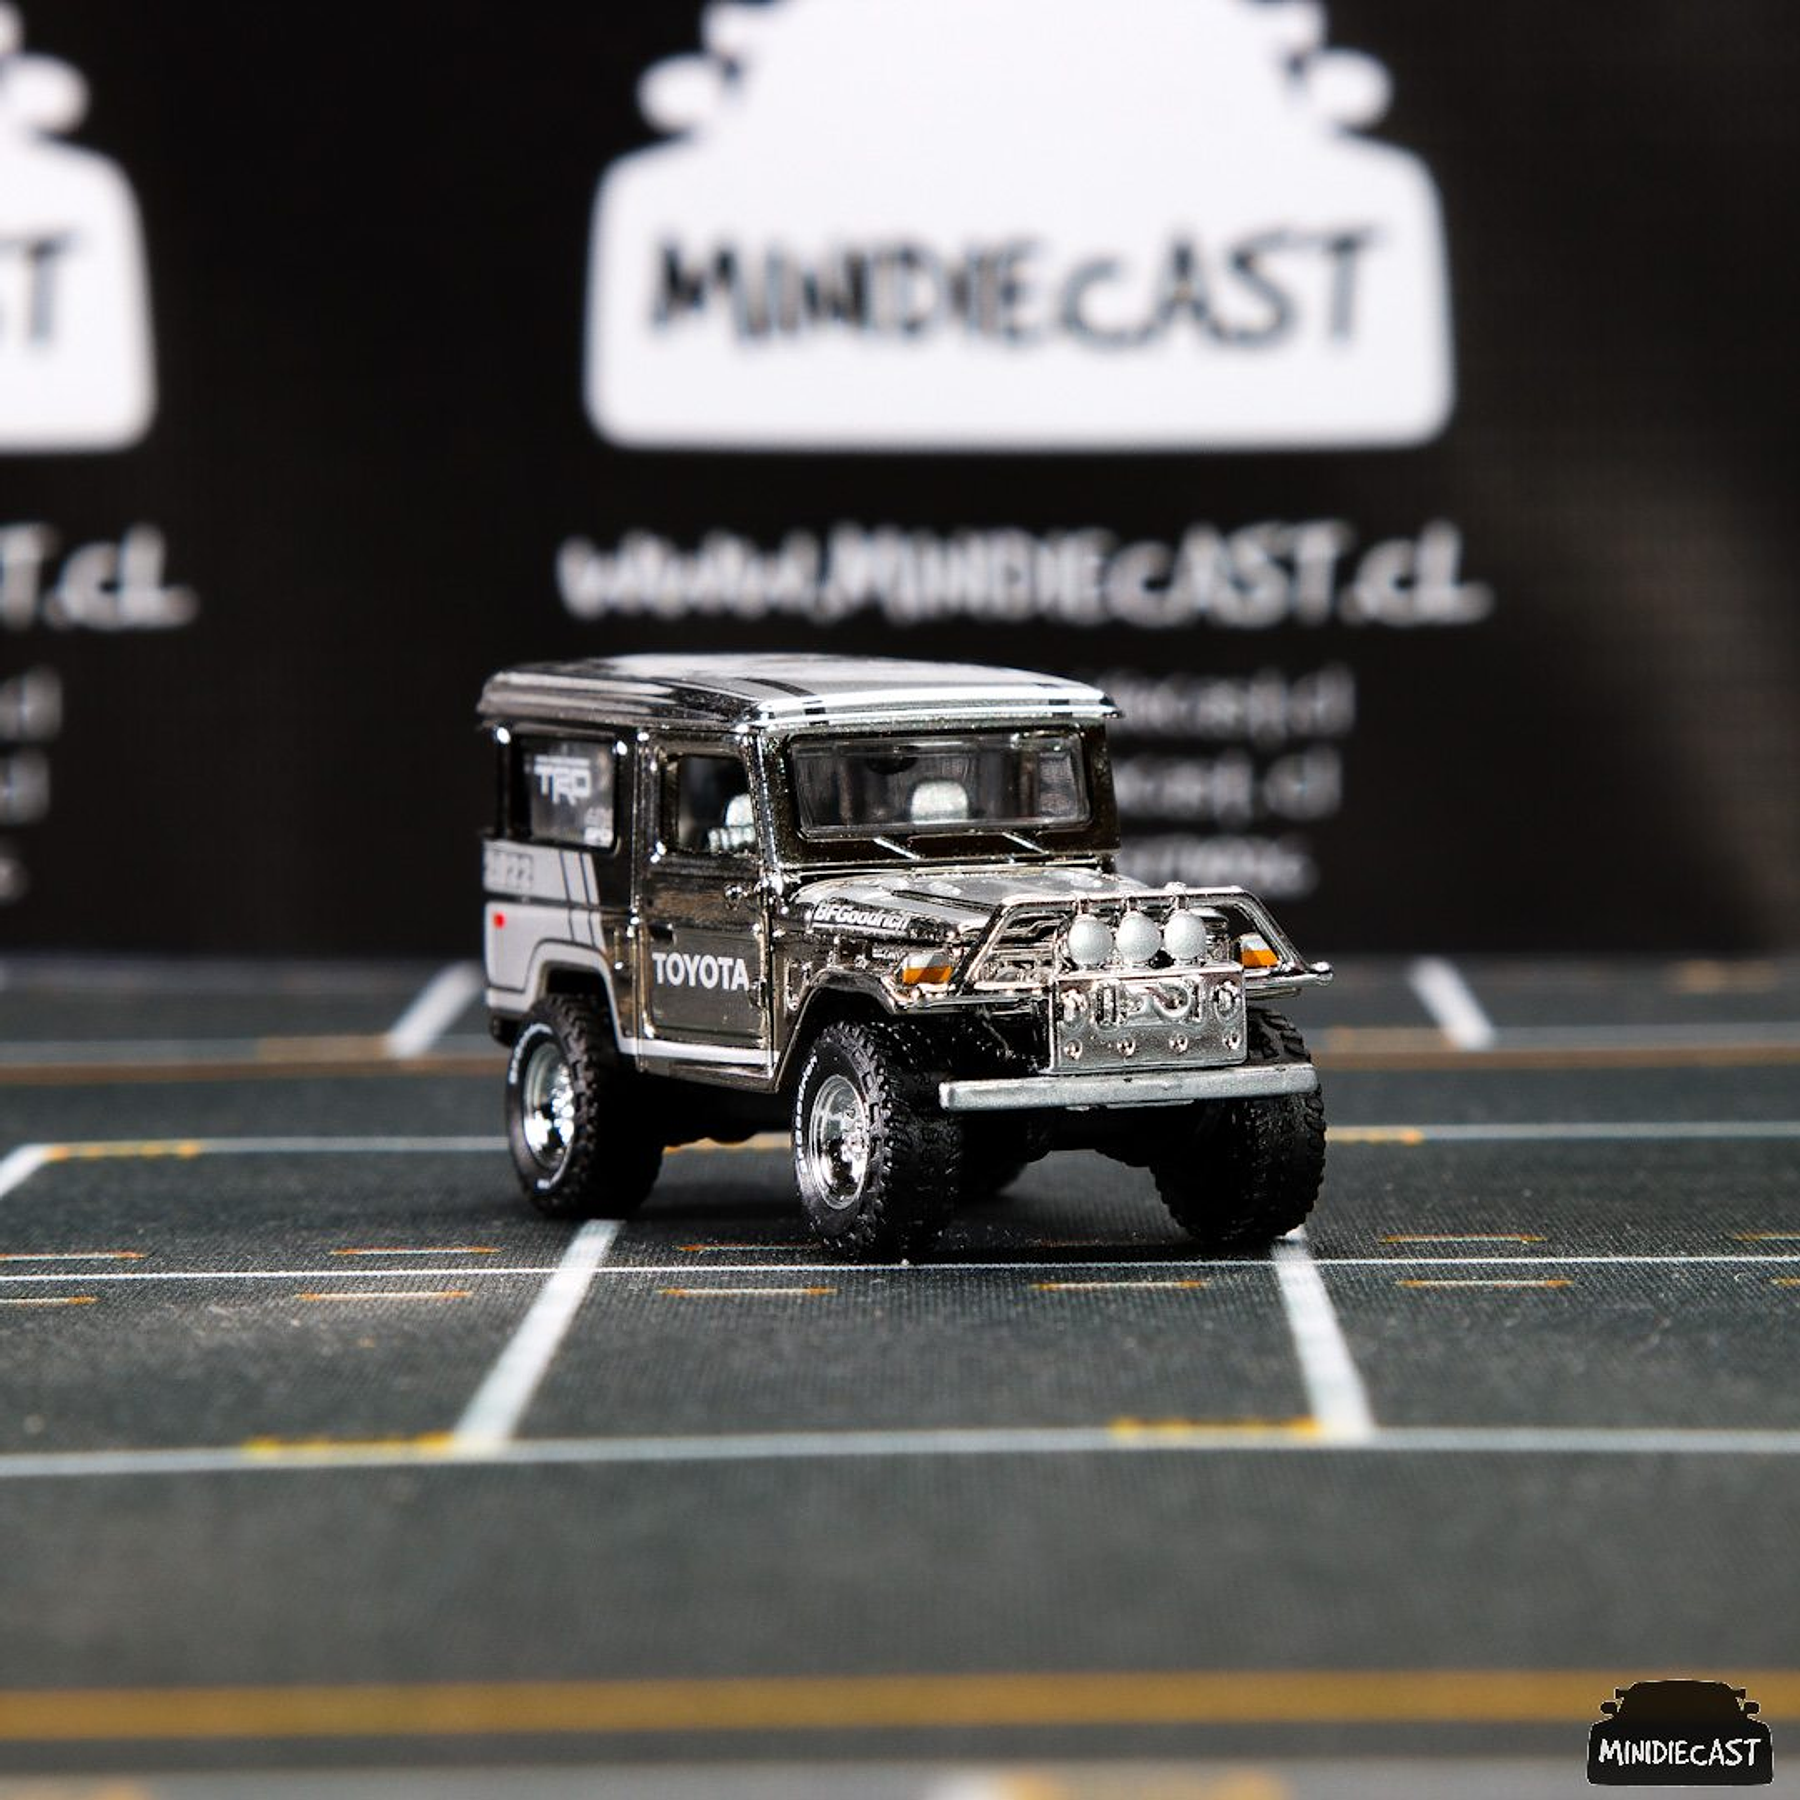 Johnny Lightning 1:64 1980 Toyota Land Cruiser “Forty ” Series CHROME With Showcase Limited 3,600 Mijo Exclusives